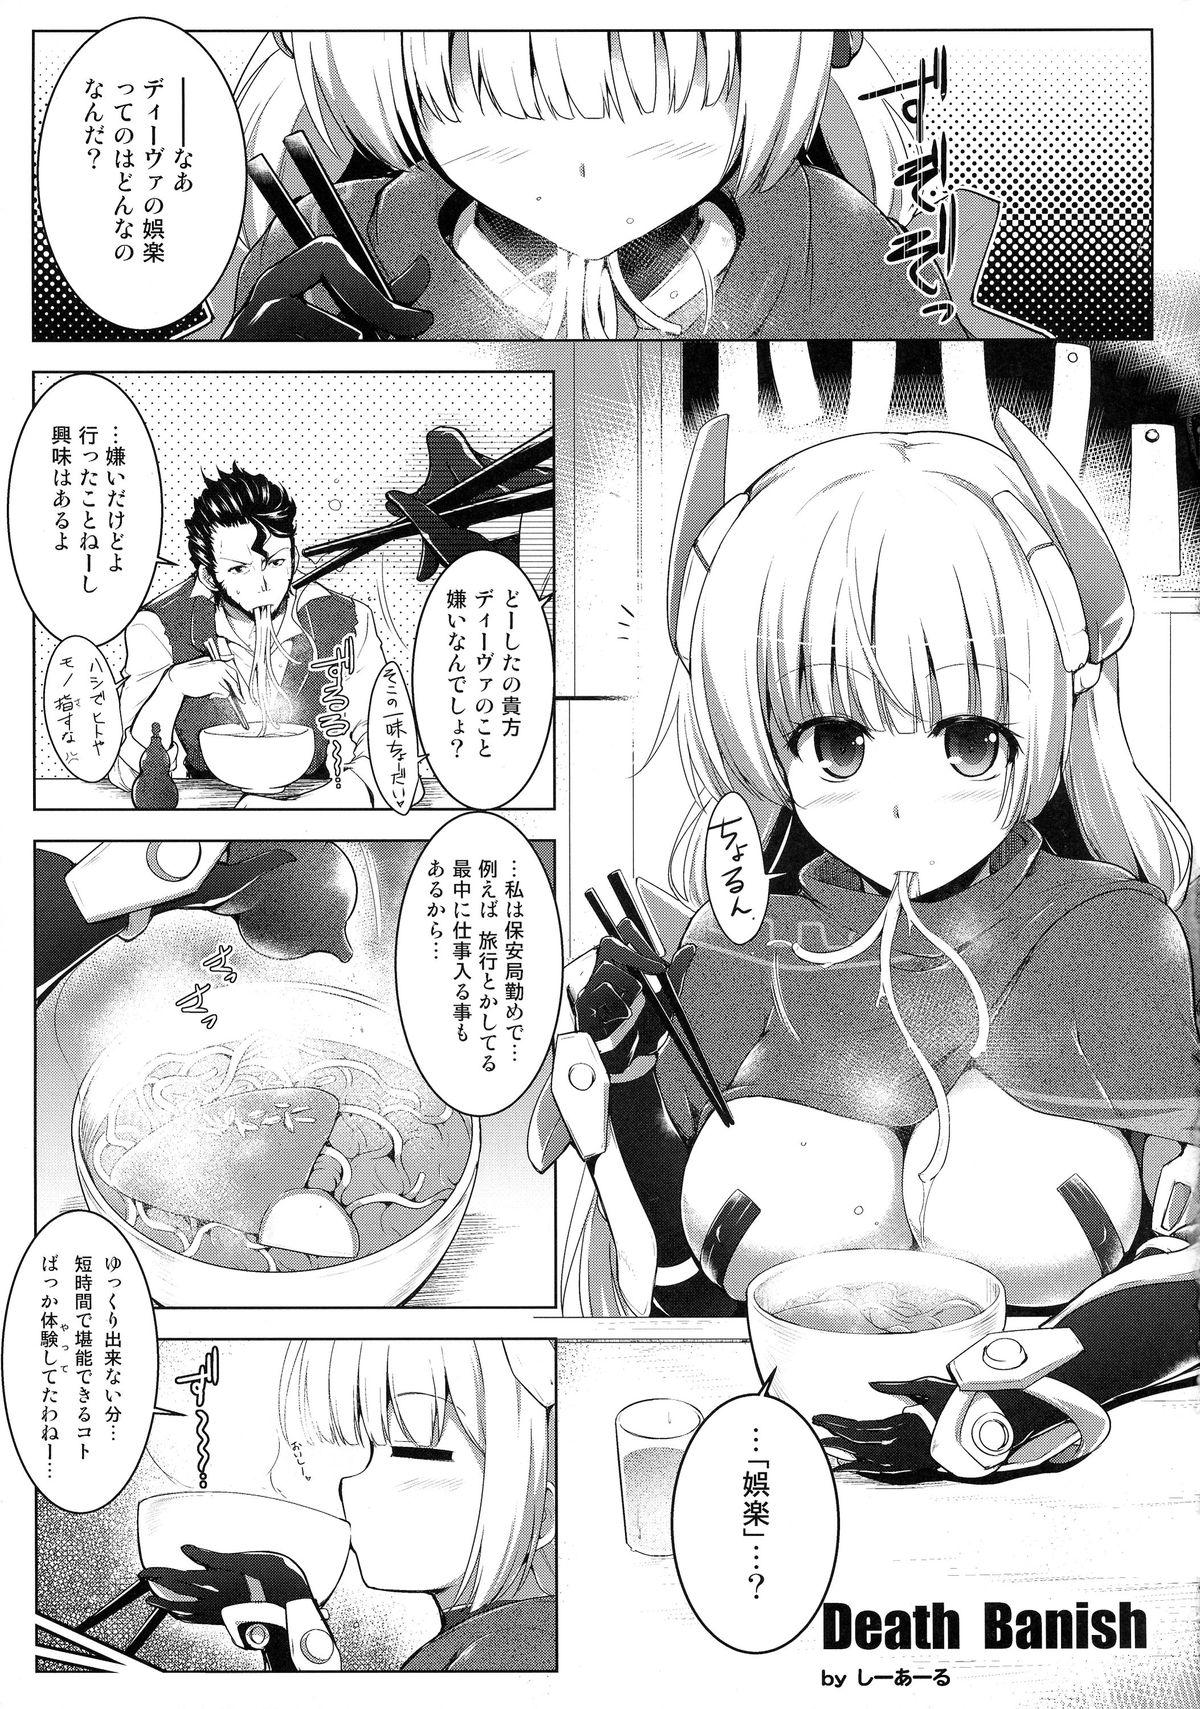 Throatfuck K.231 - Expelled from paradise Throatfuck - Page 5